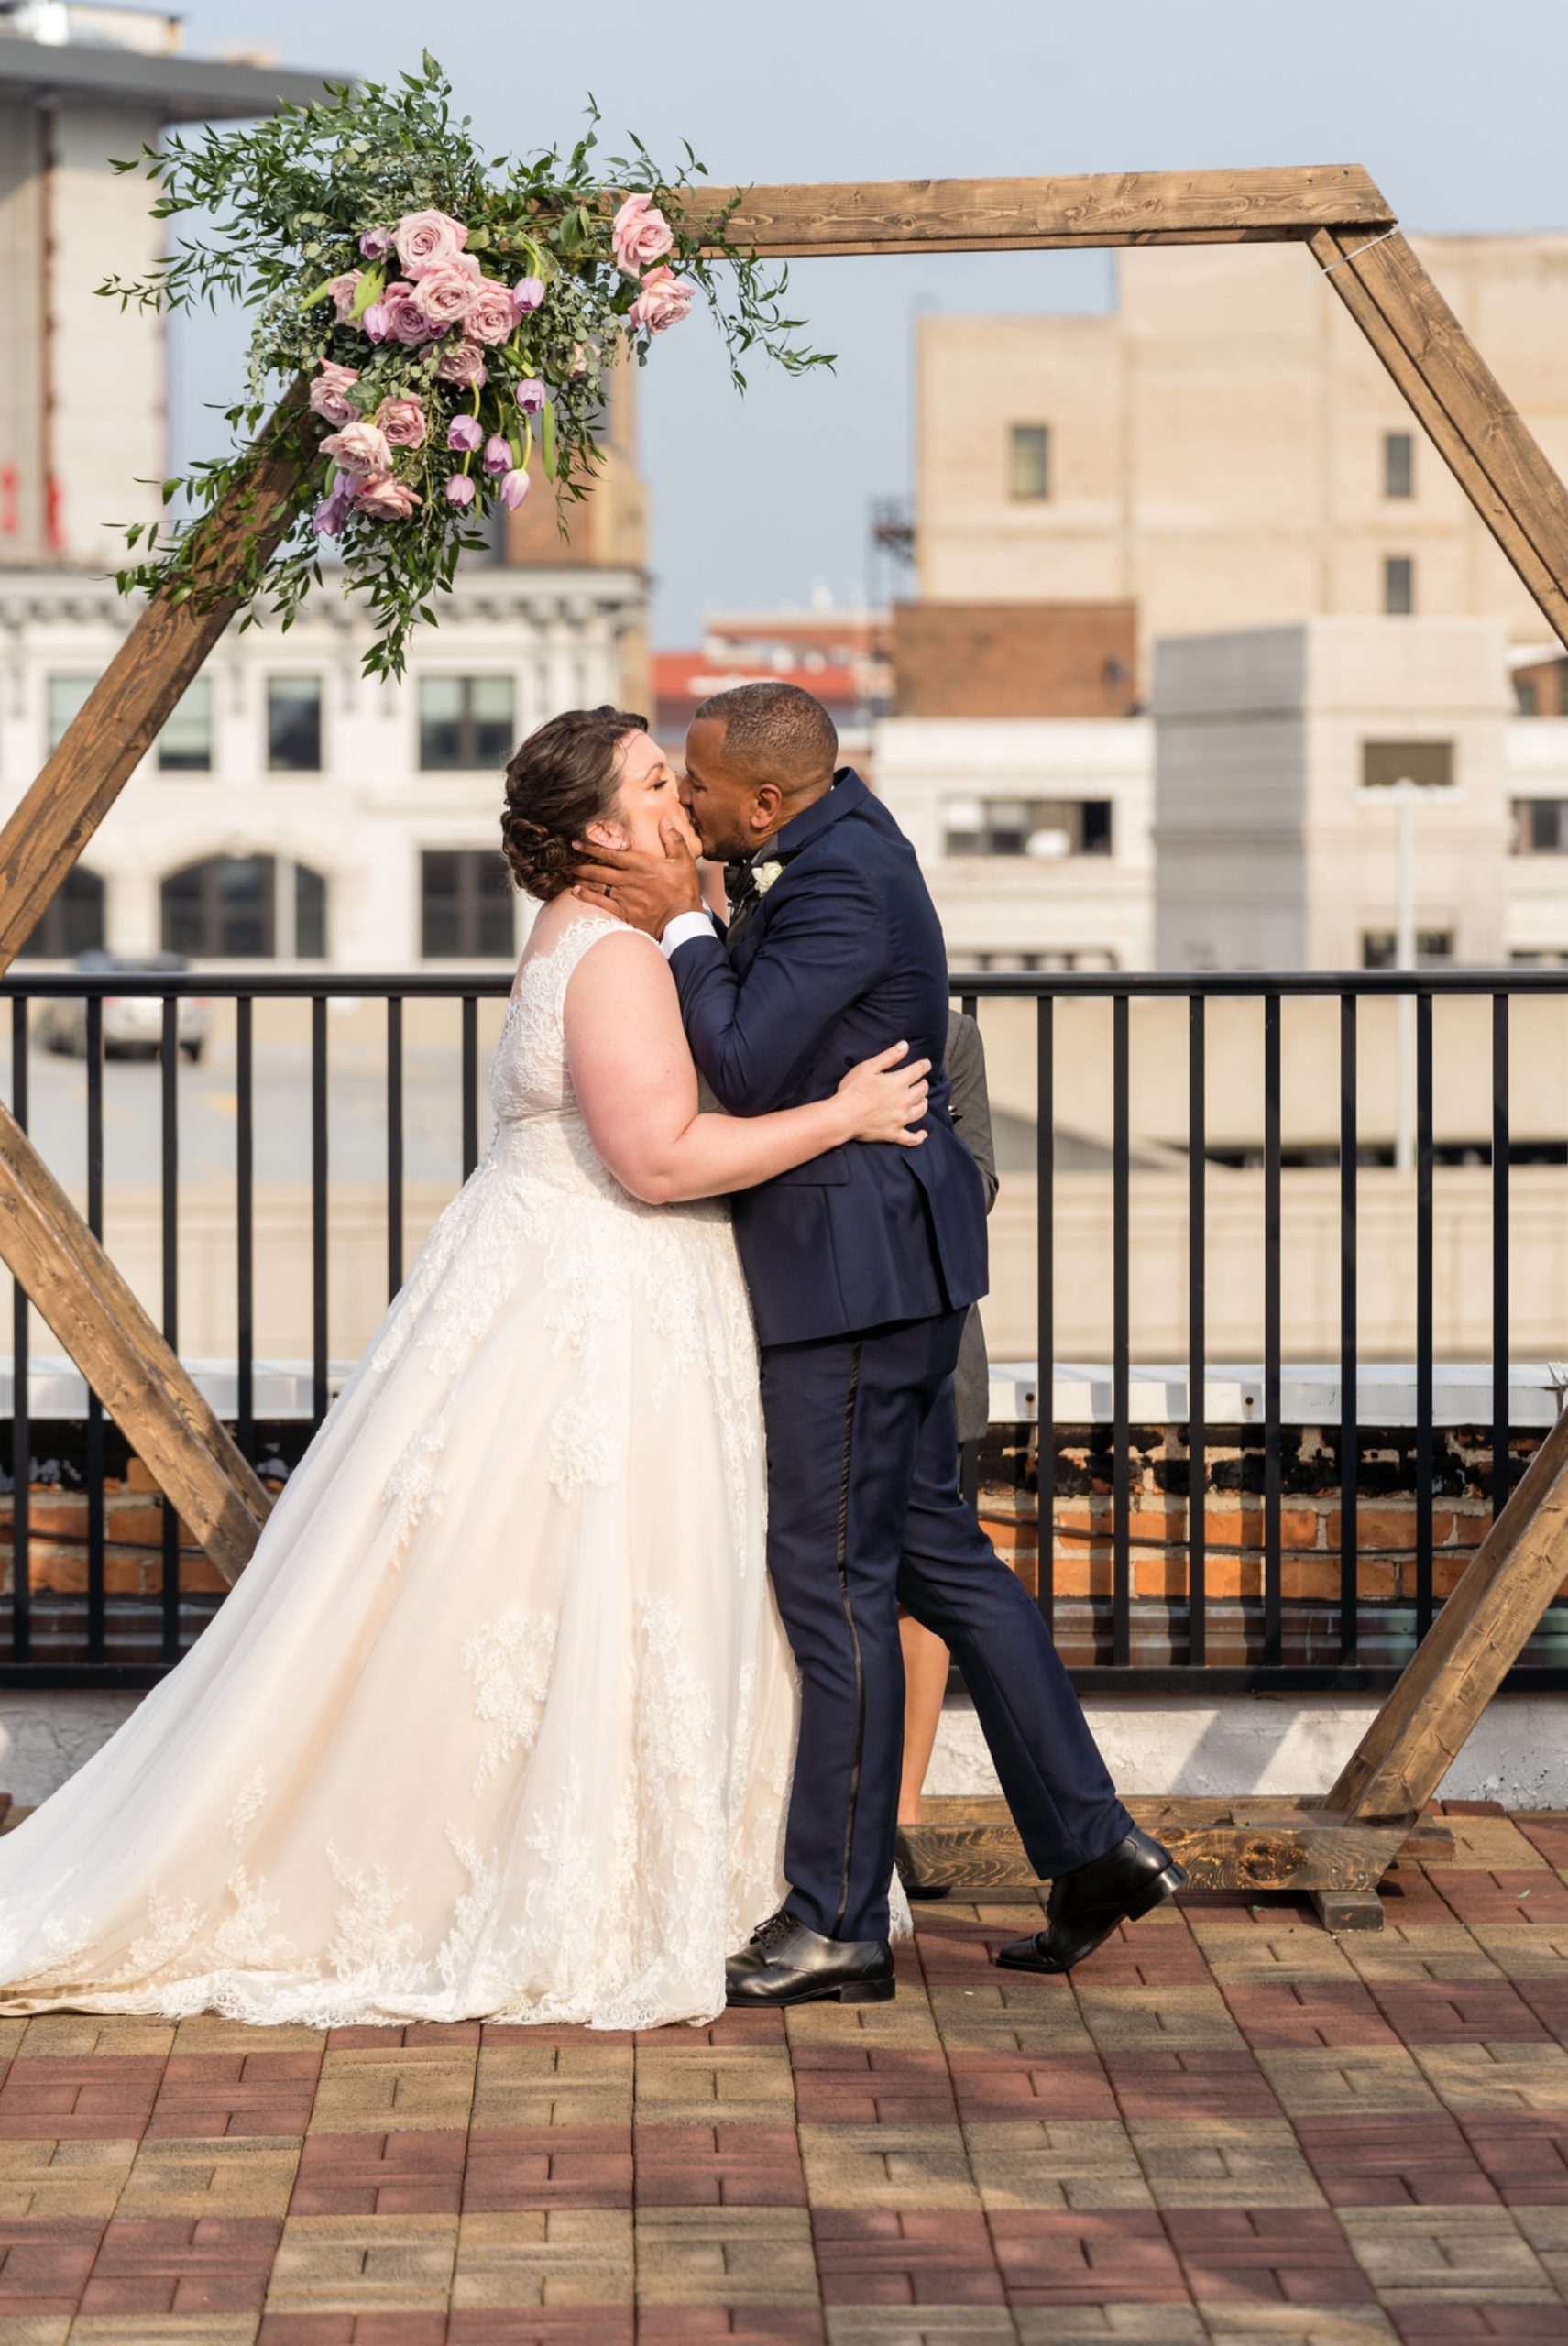 bride and groom share a first kiss at their wedding at the Detroit Opera house